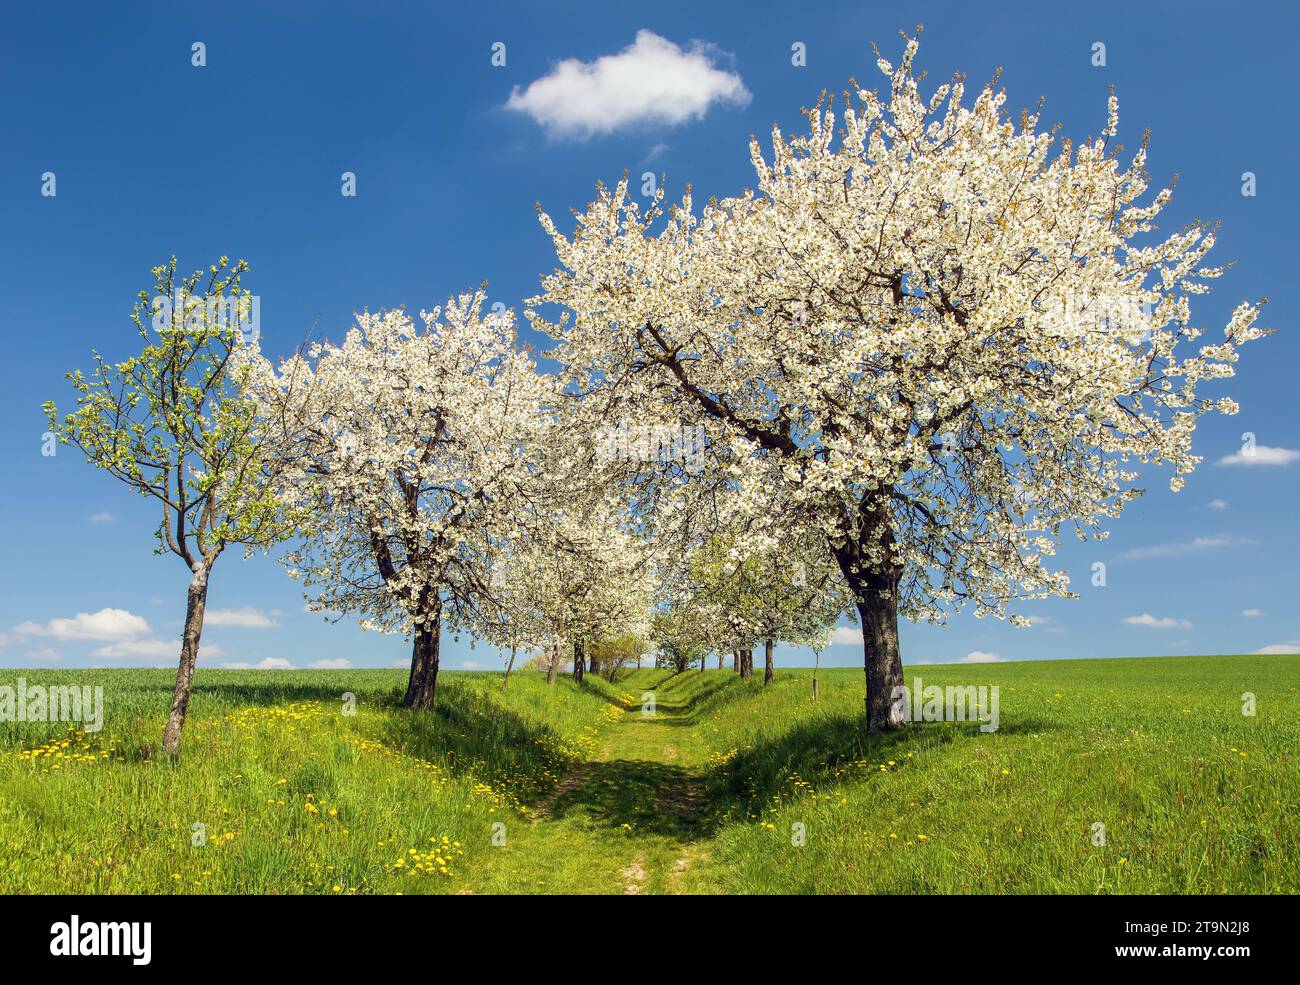 bridle path and alley of flowering cherry and plum trees, Springtime landscape Stock Photo